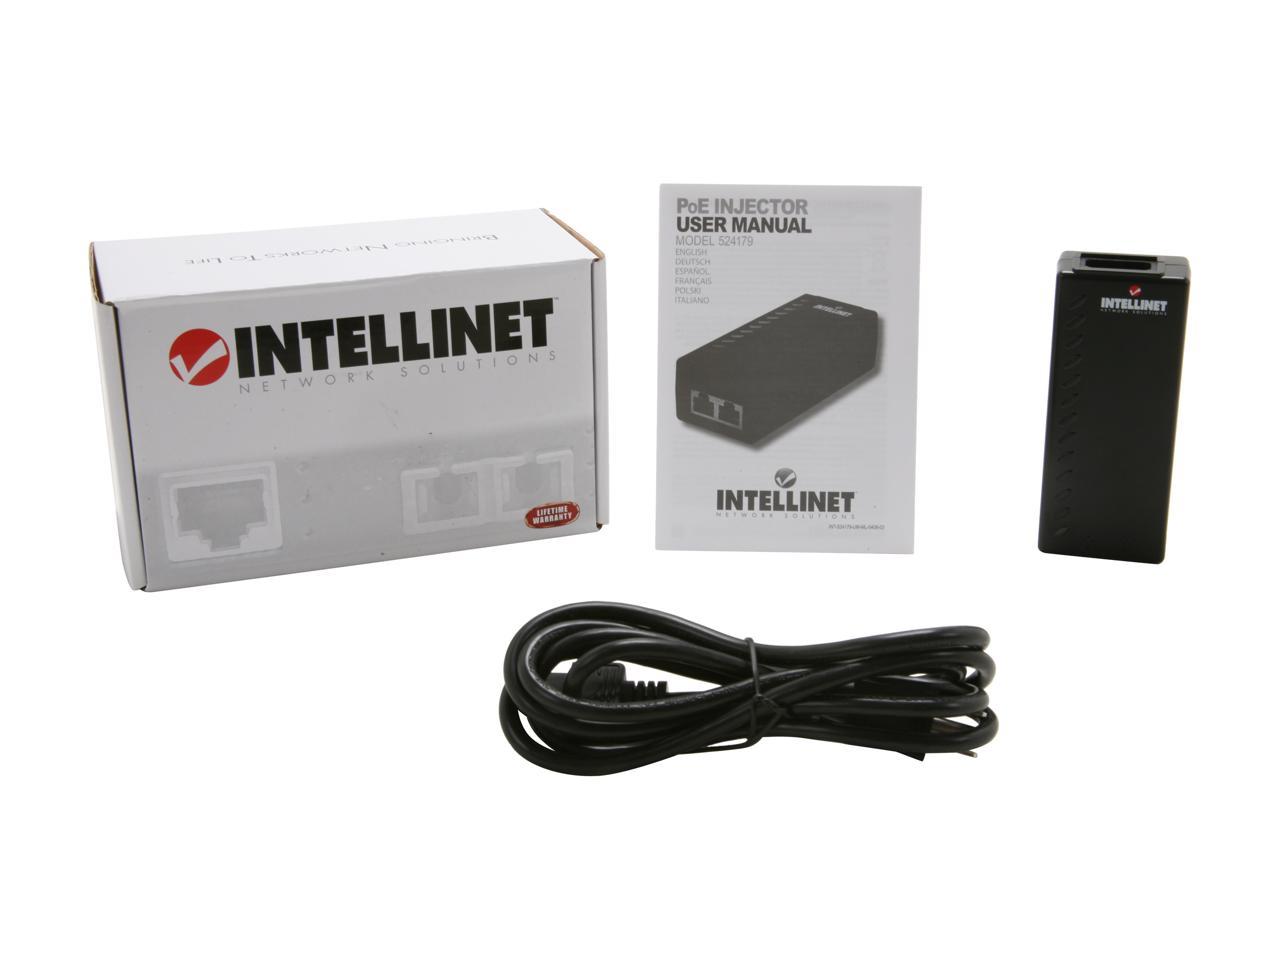 NEW SEALED INTELLINET 524179 POWER OVER ETHERNET INJECTOR POE 